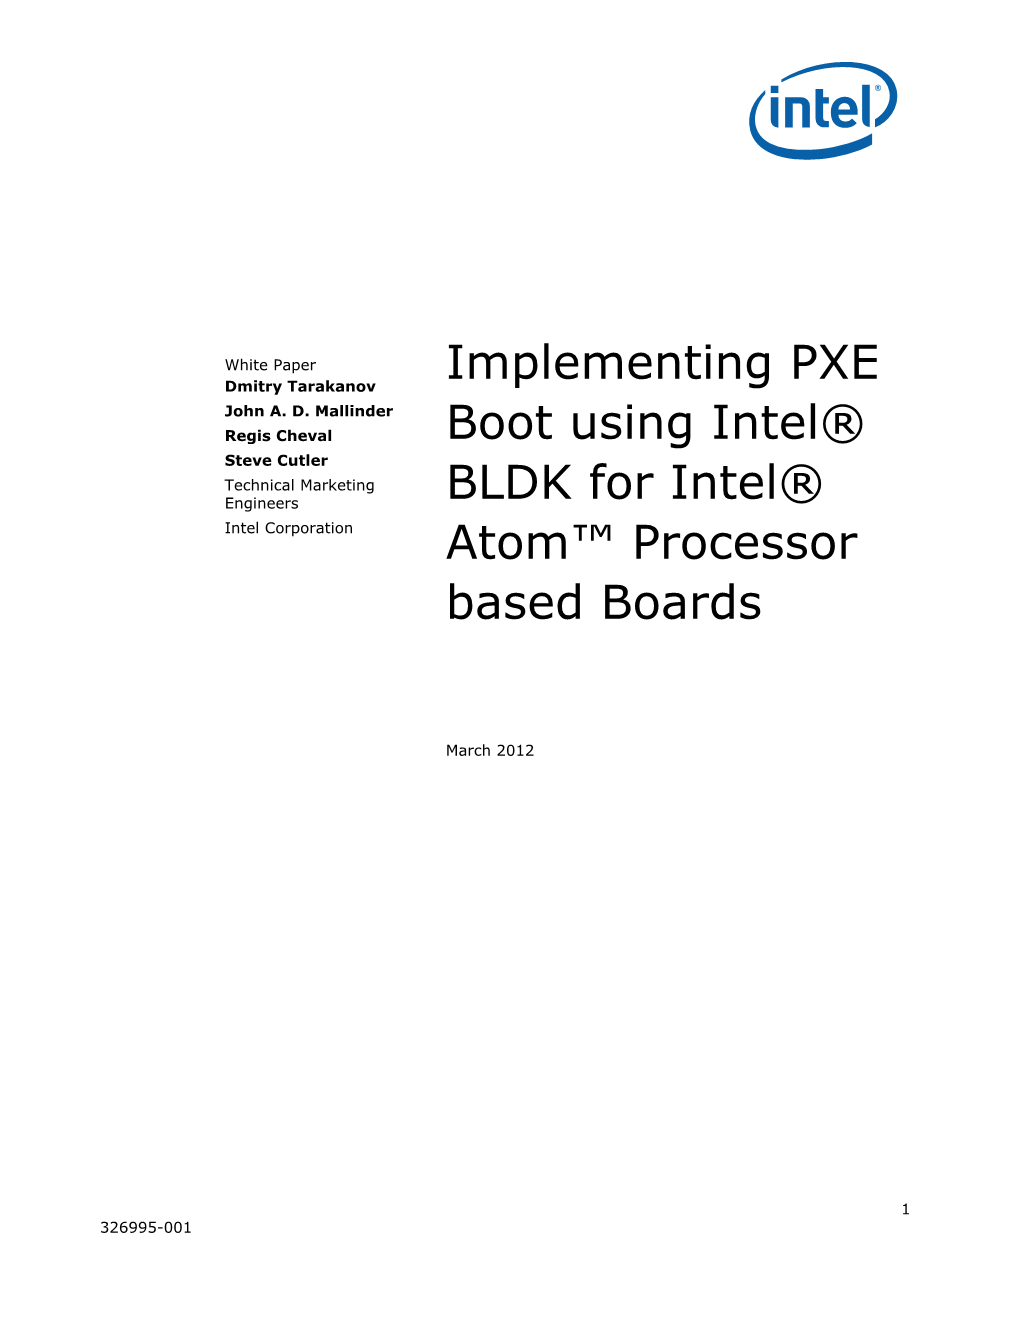 Implementing PXE Boot Using Intel® BLDK for Intel® Atom™ Processor Based Boards